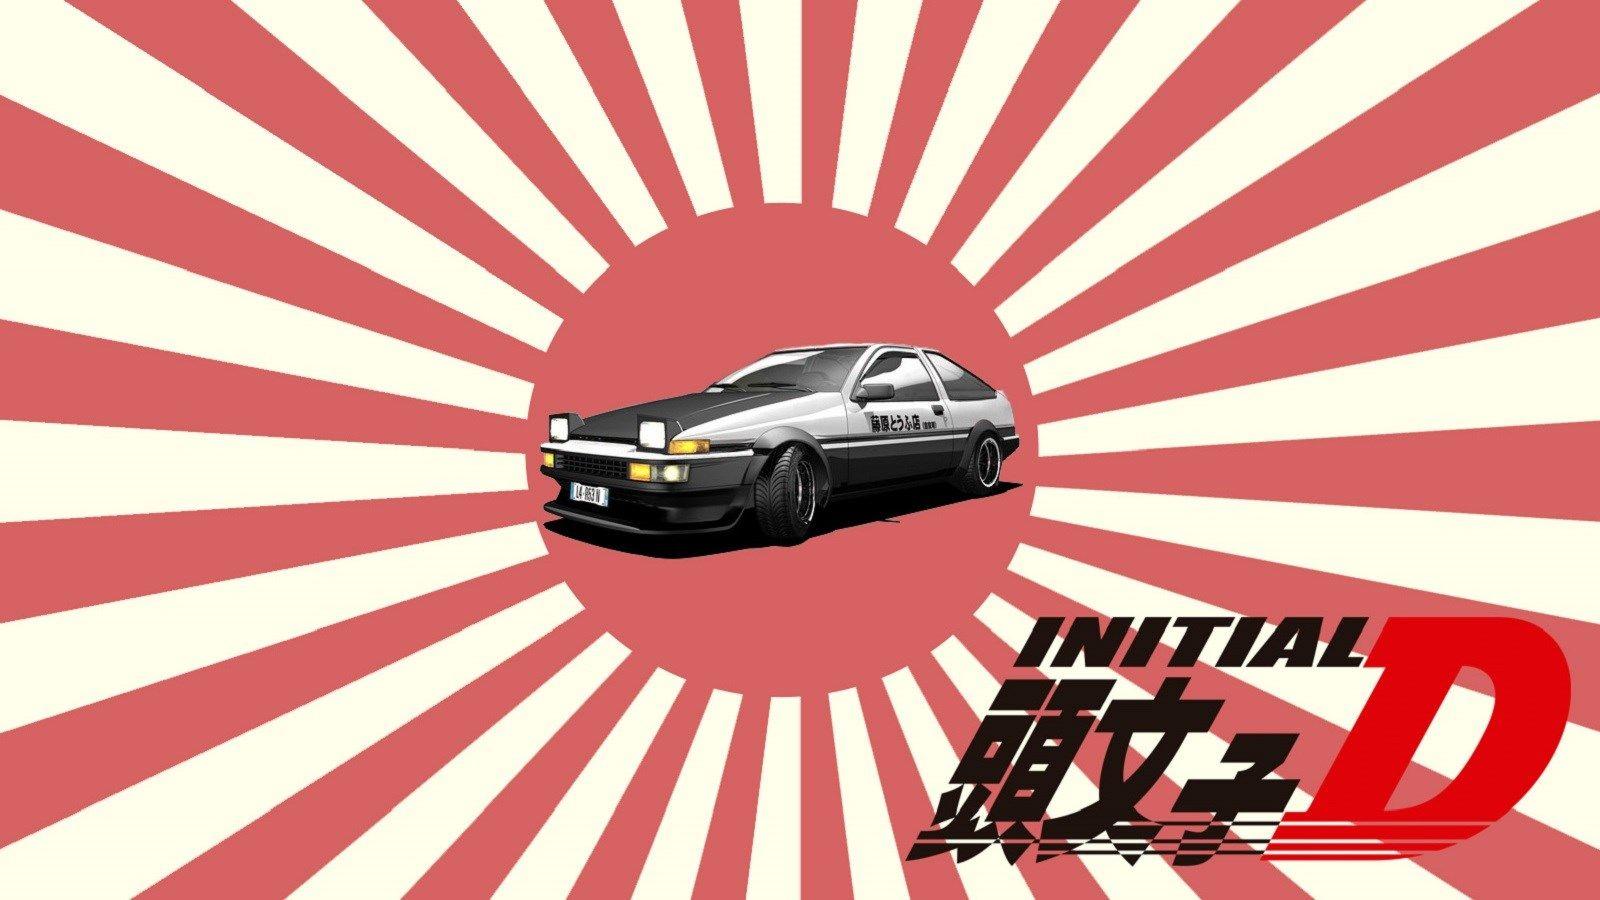 Peni Ross initial d final stage pic